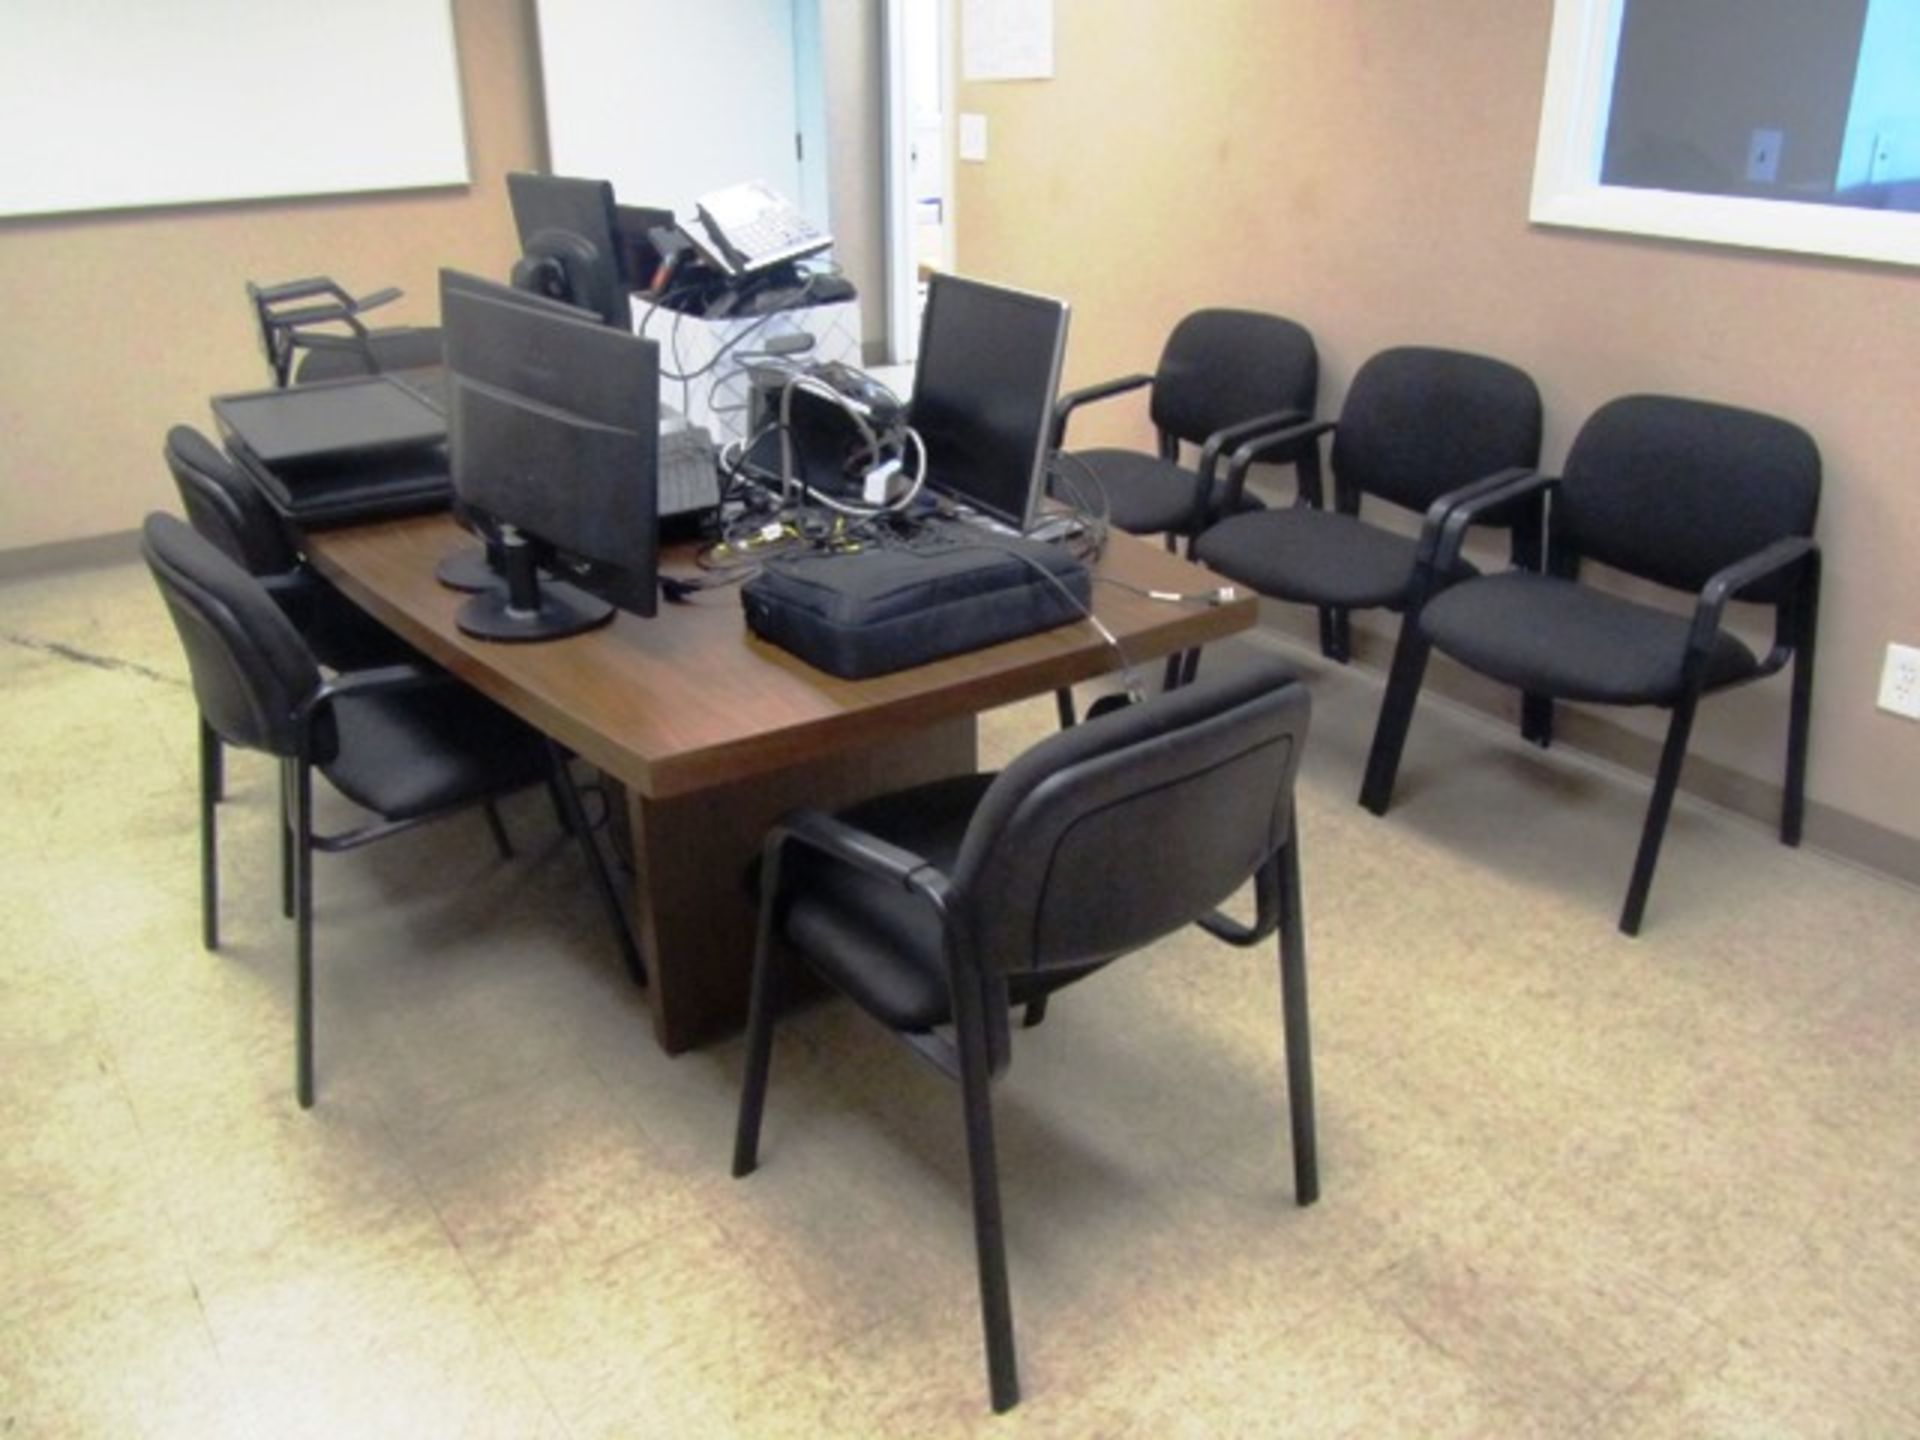 5' x 10' Conference Table with (10) Chairs (no computers)